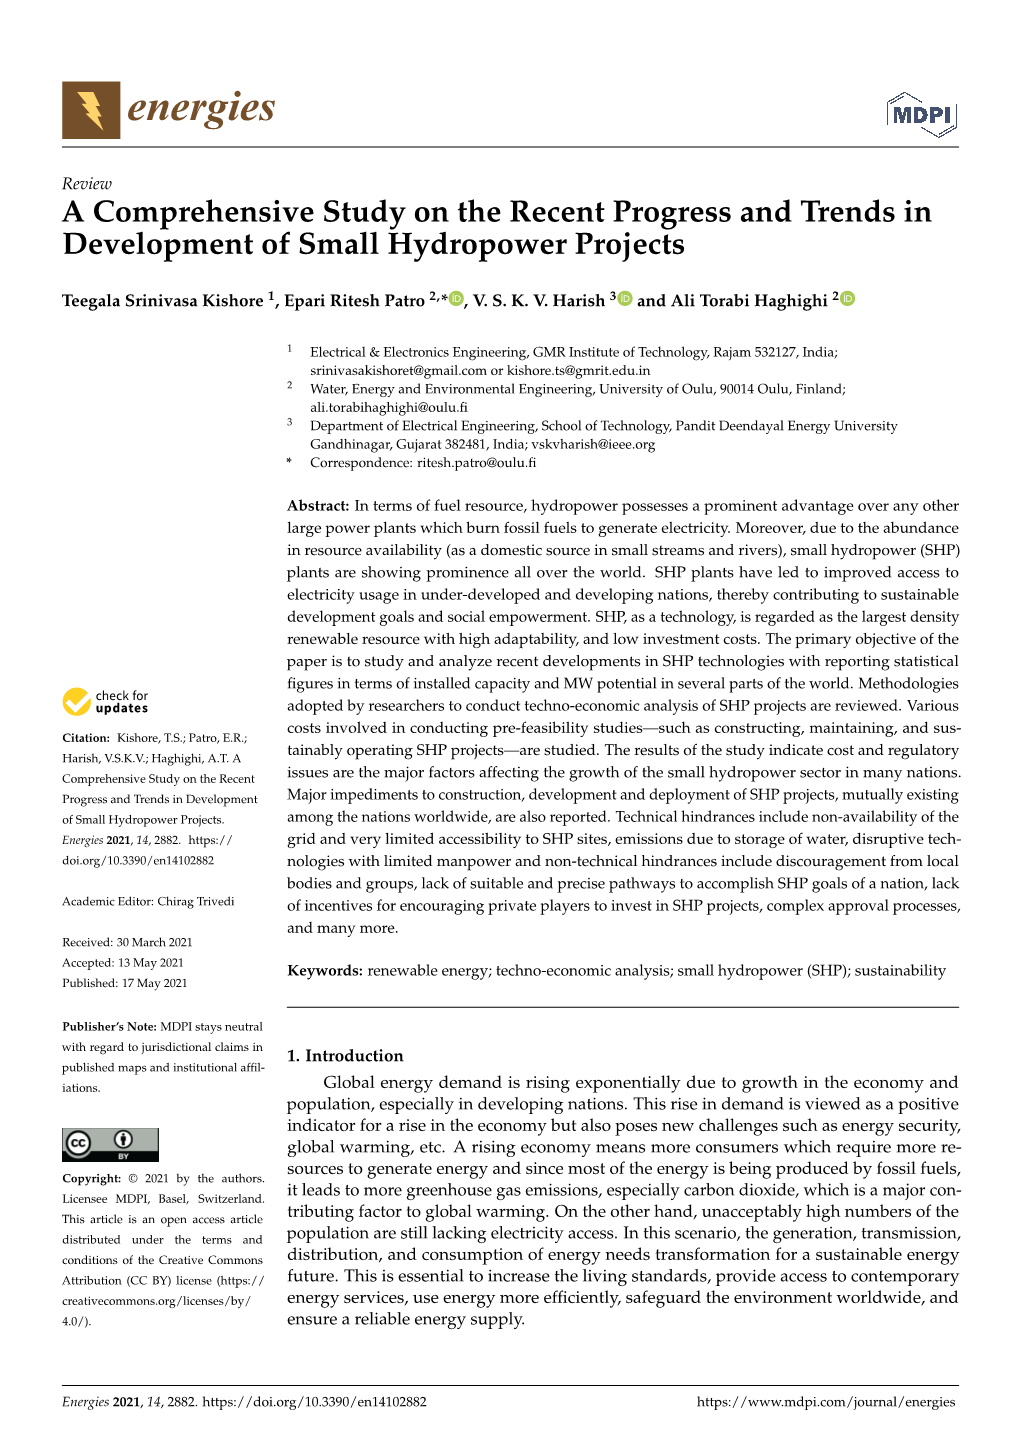 A Comprehensive Study on the Recent Progress and Trends in Development of Small Hydropower Projects